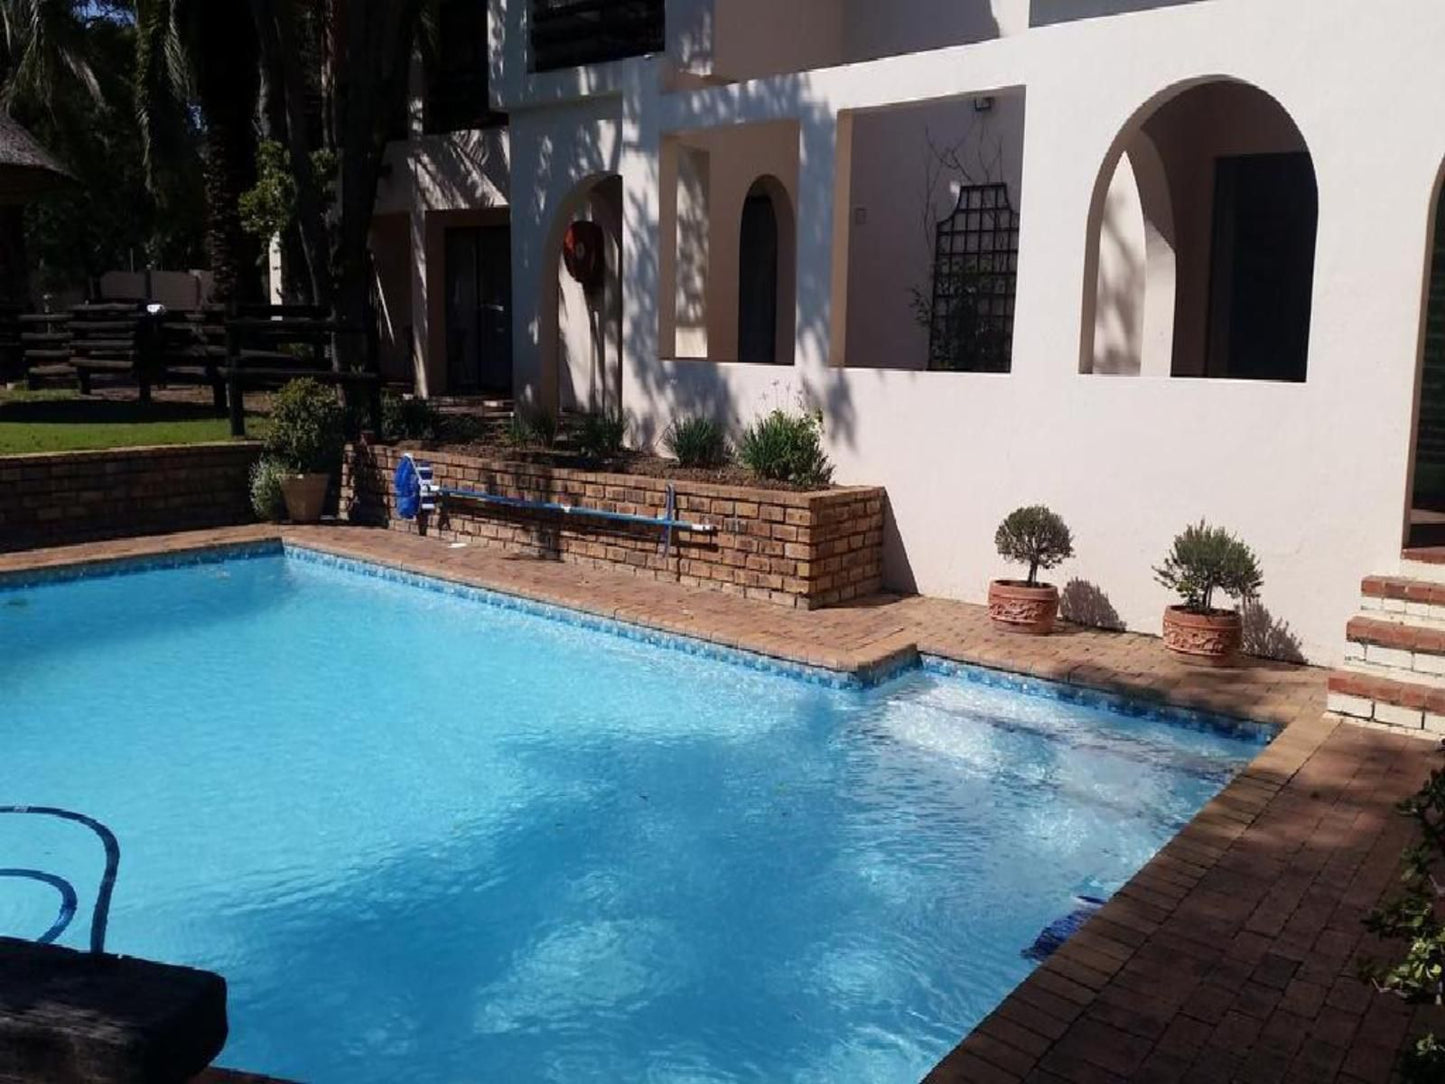 Dalberry Guest House Fourways Johannesburg Gauteng South Africa House, Building, Architecture, Swimming Pool